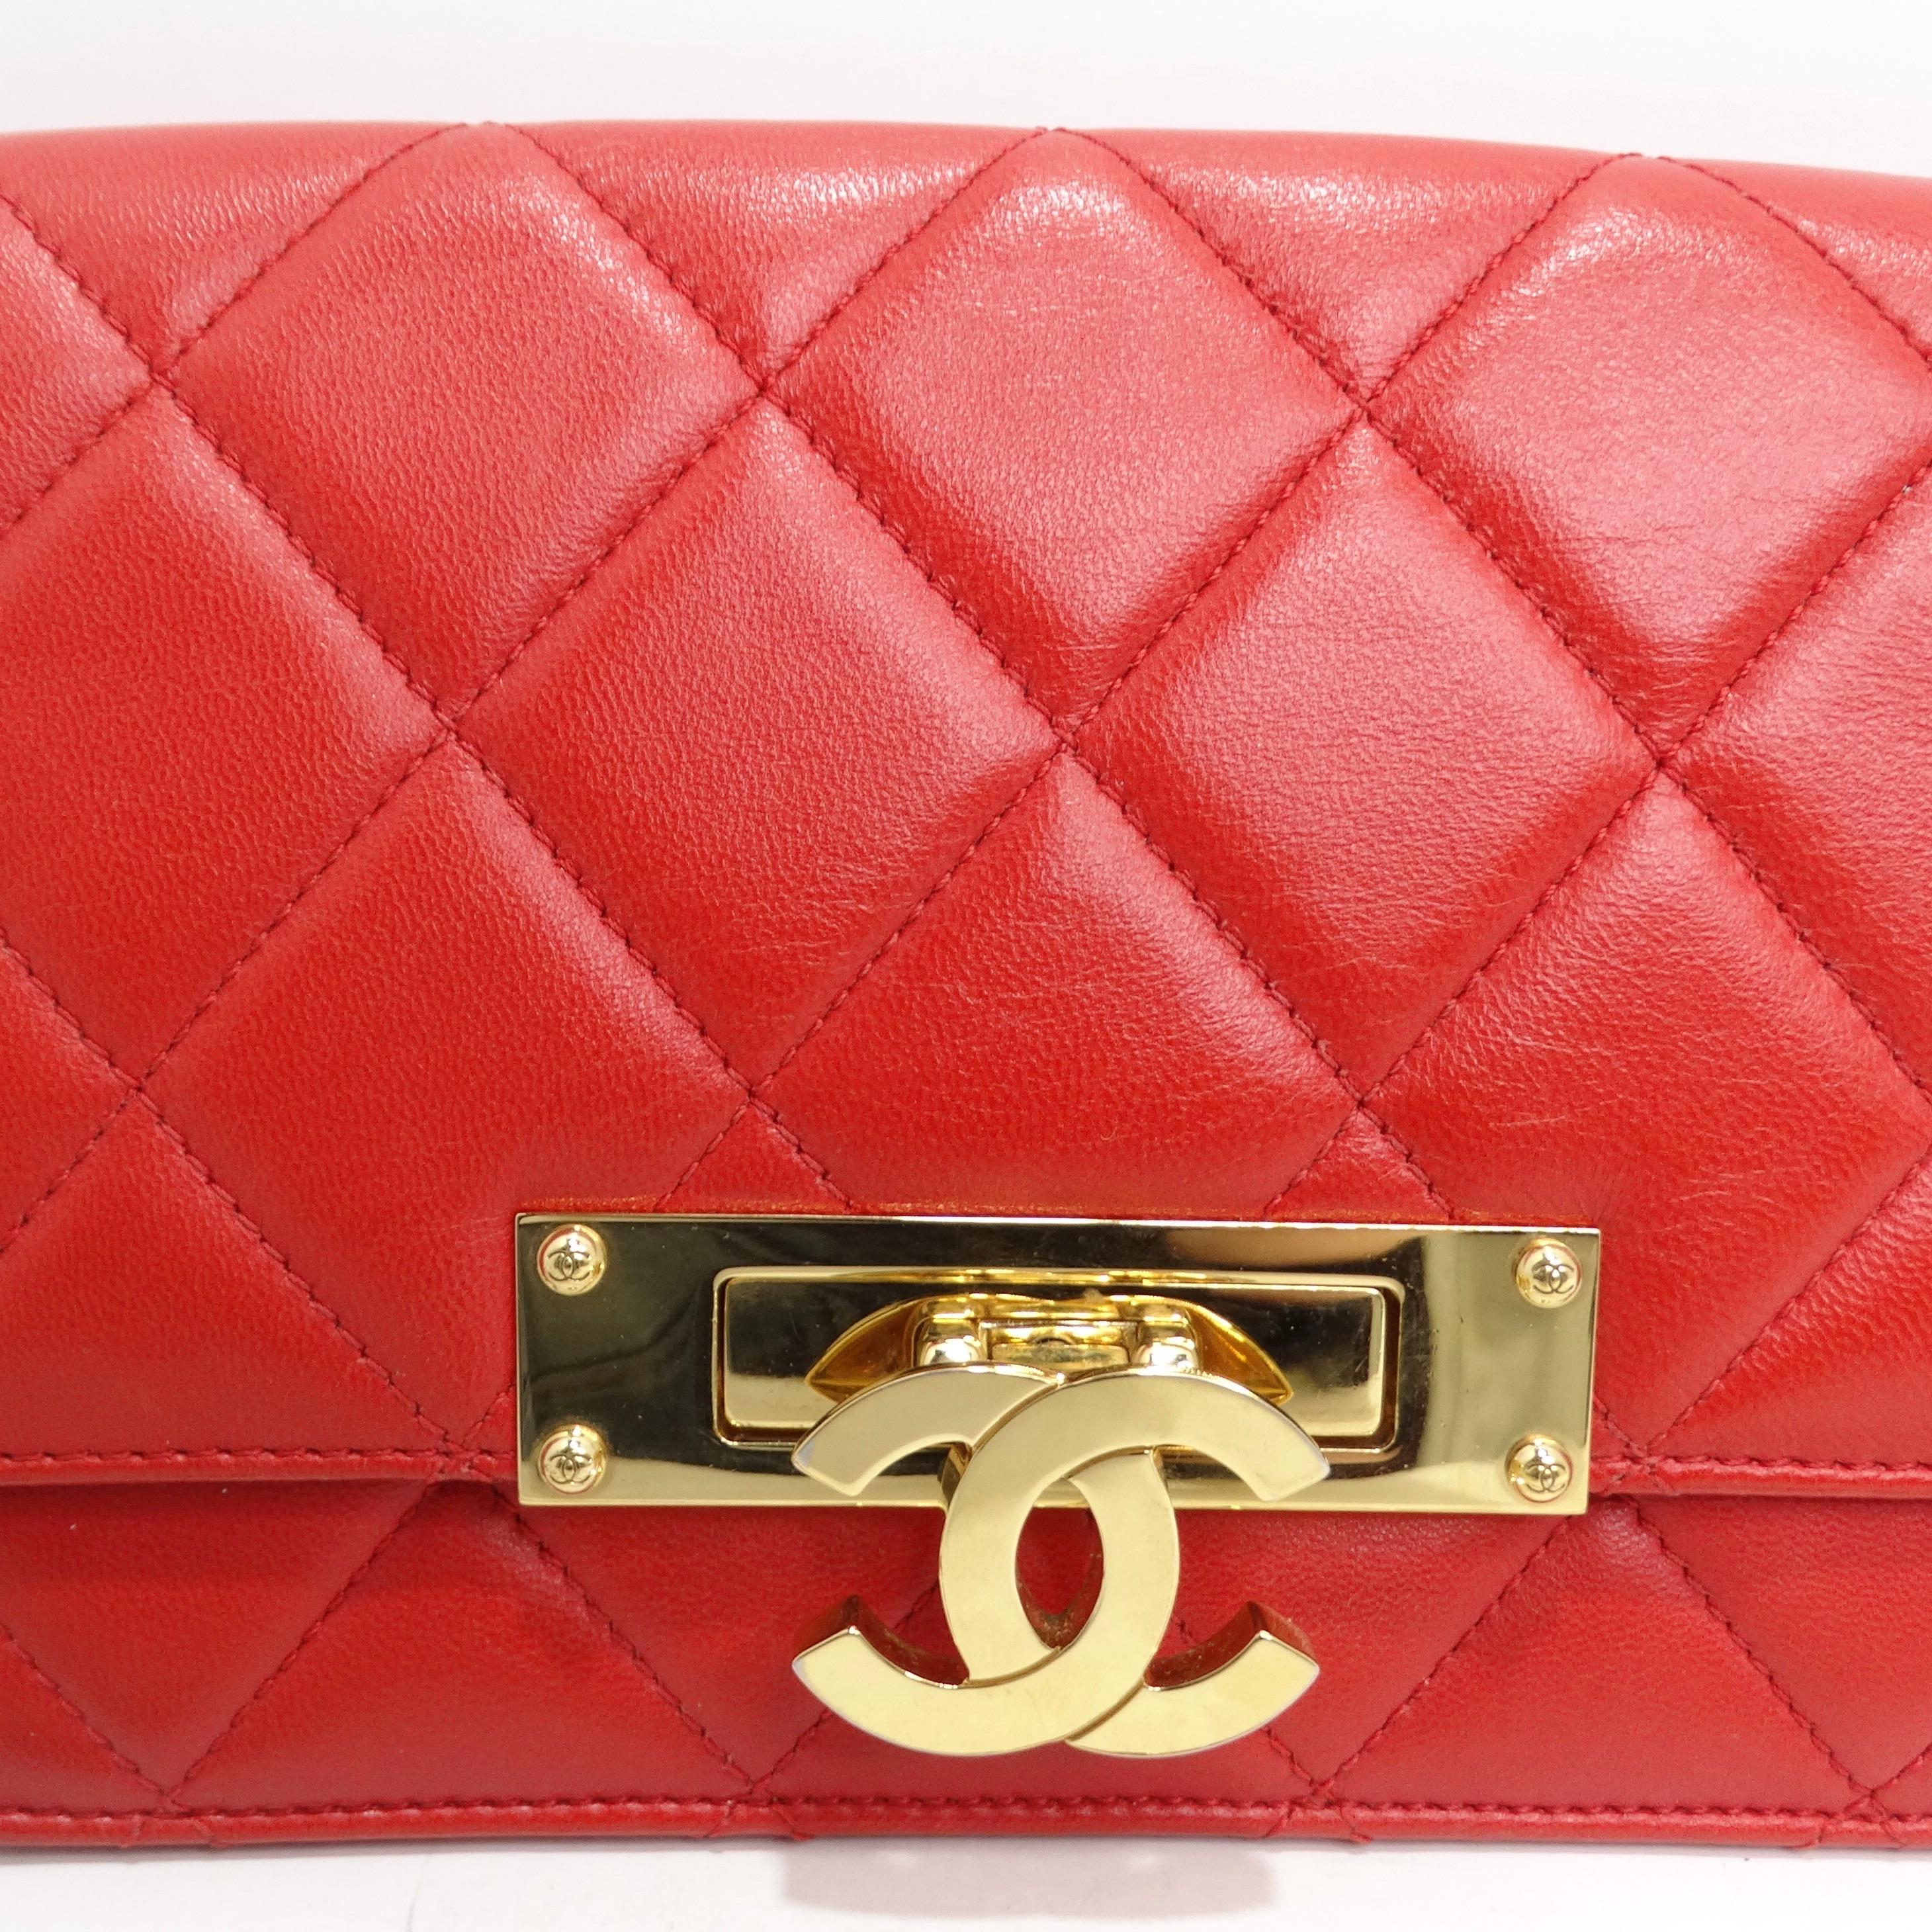 Chanel Lambskin Quilted Golden Class Wallet on Chain Red In Excellent Condition For Sale In Scottsdale, AZ